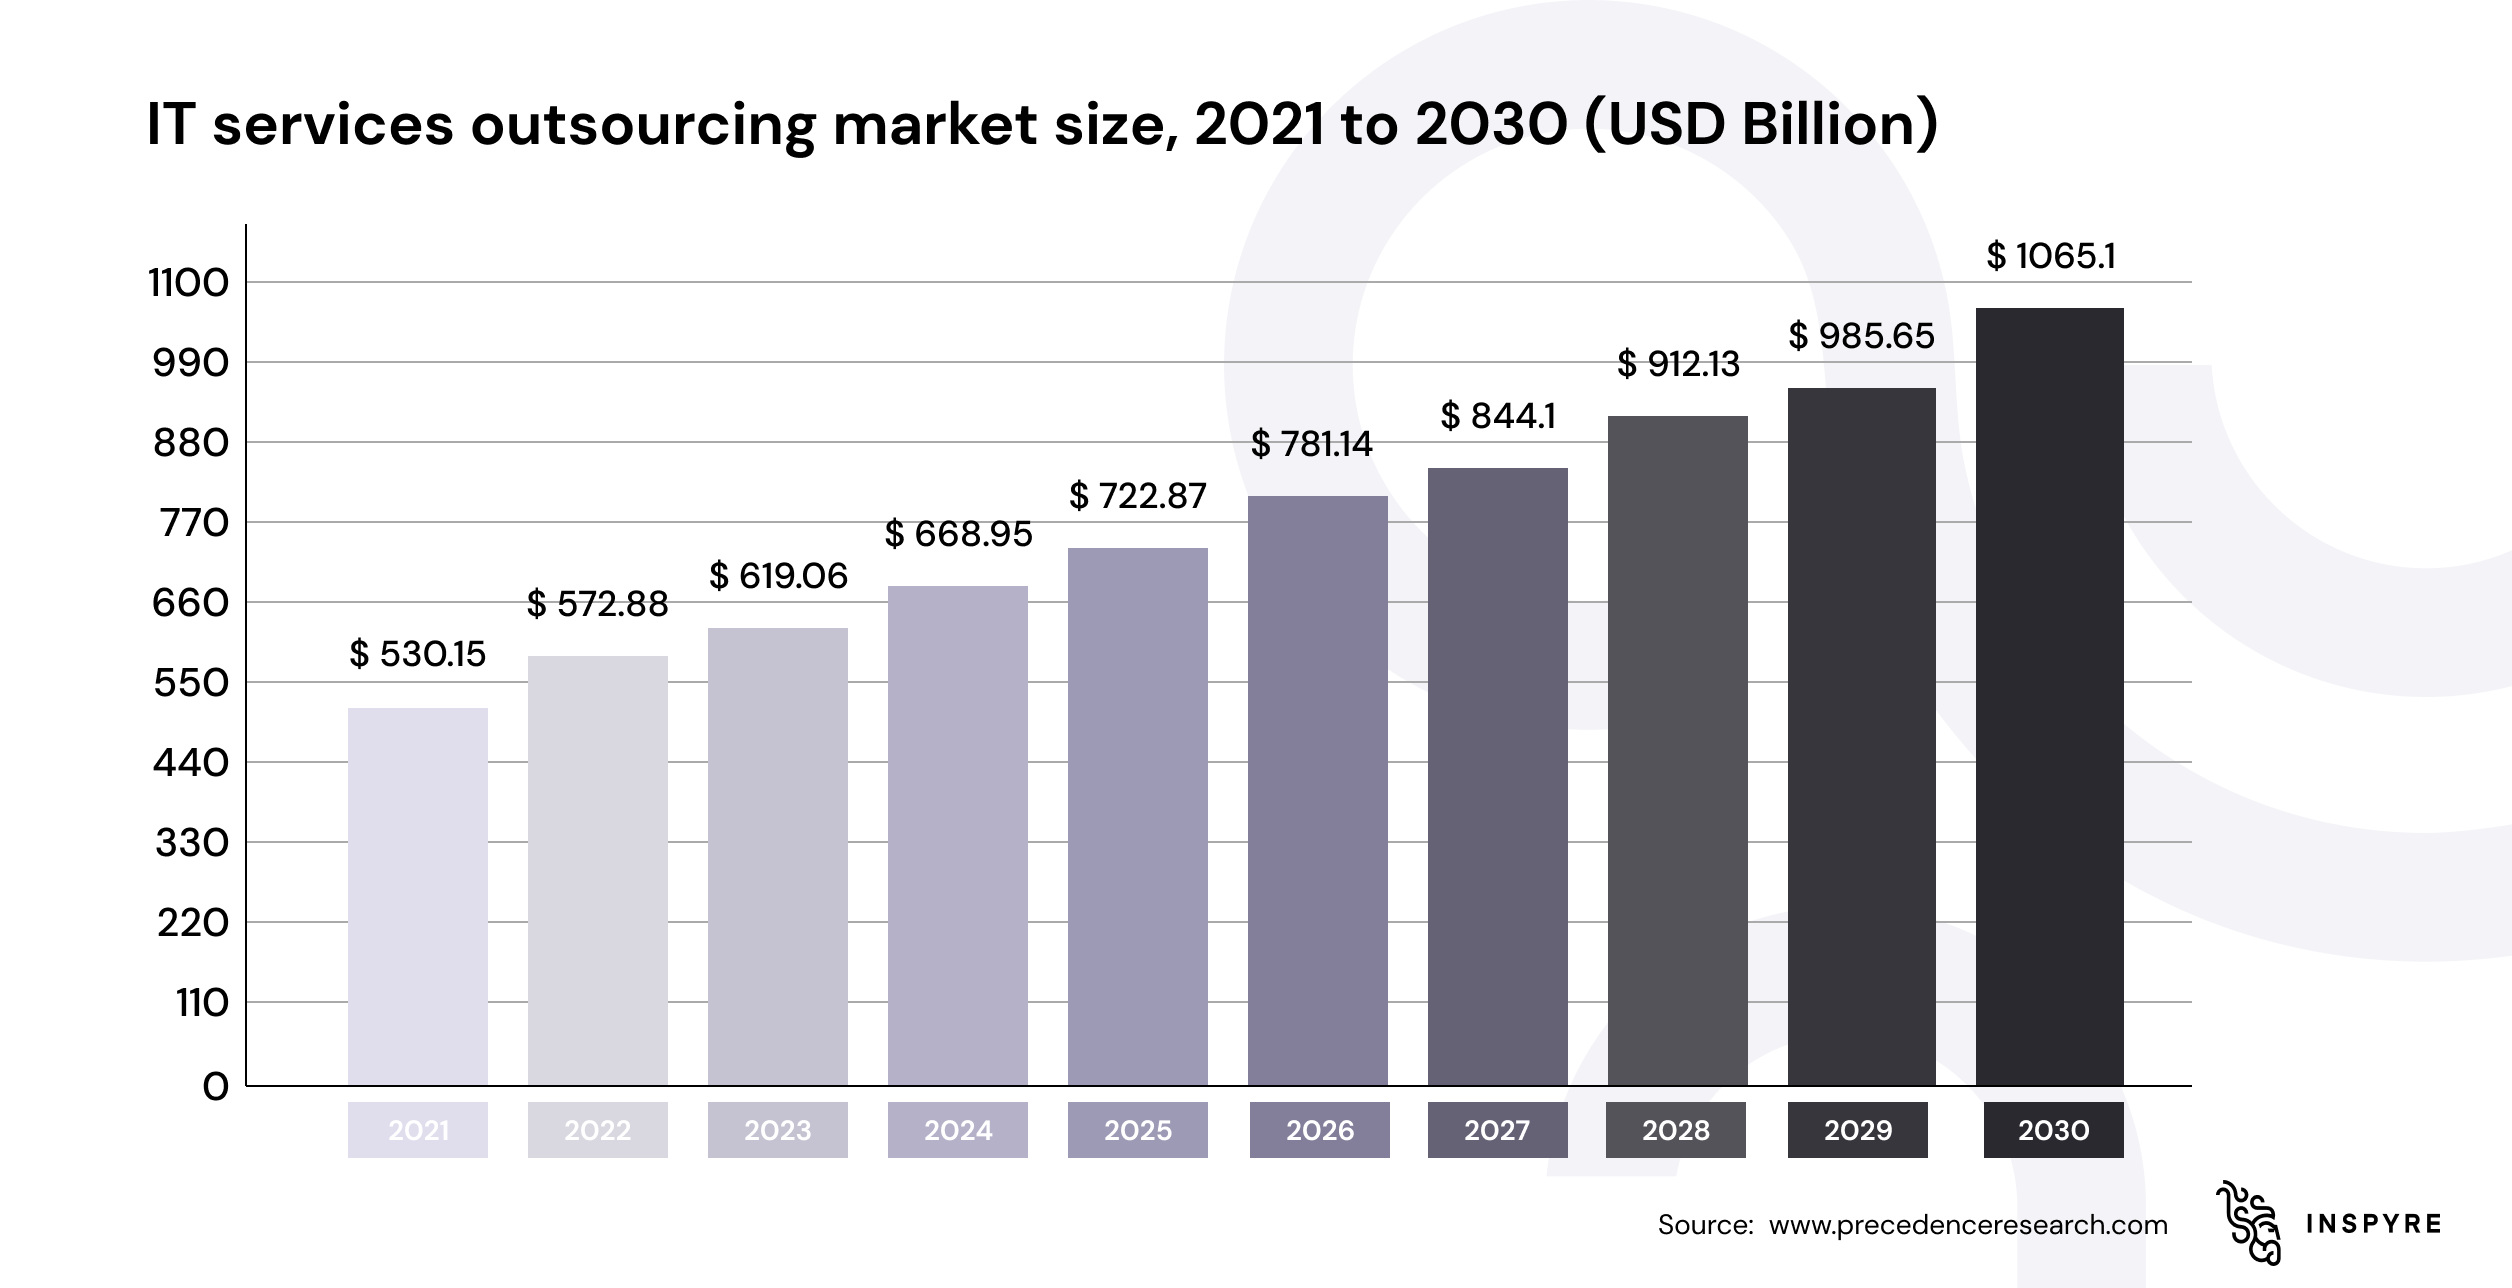 IT services outsourcing market size, 2021 to 2030 (USD billion)